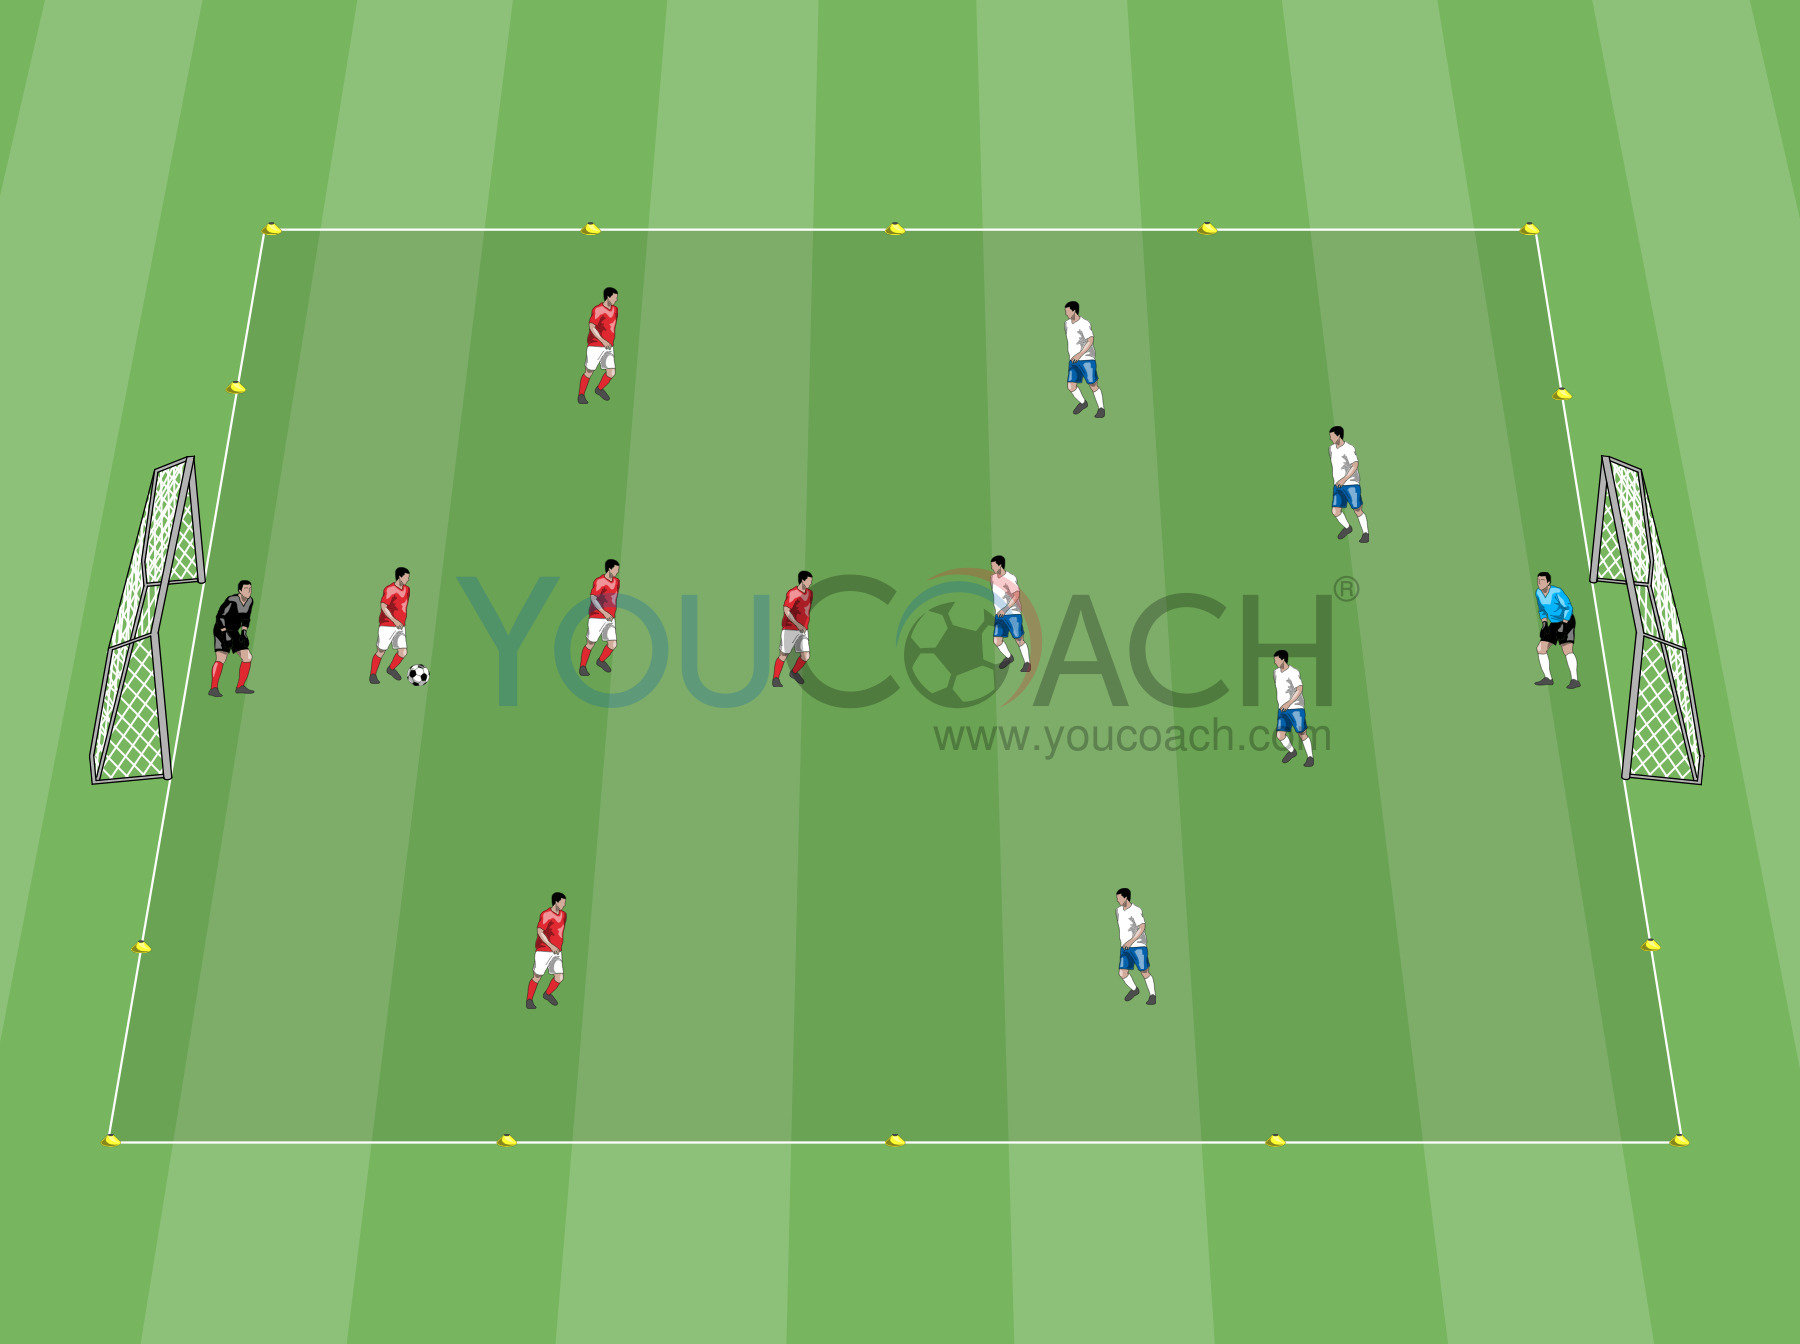 Conditioned match: limited ball touches